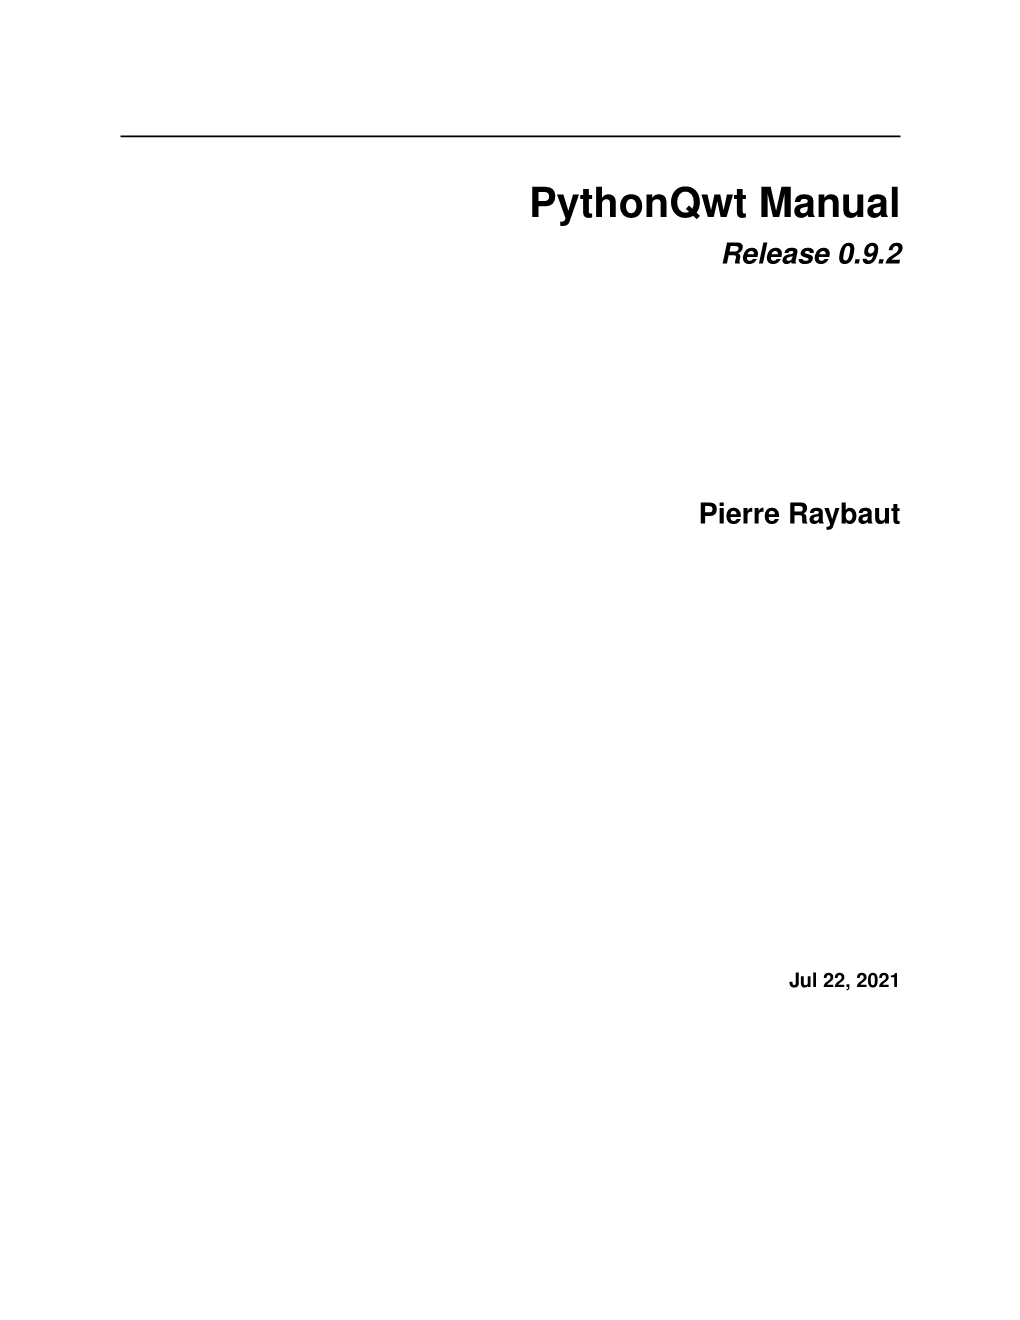 Pythonqwt Manual Release 0.9.2